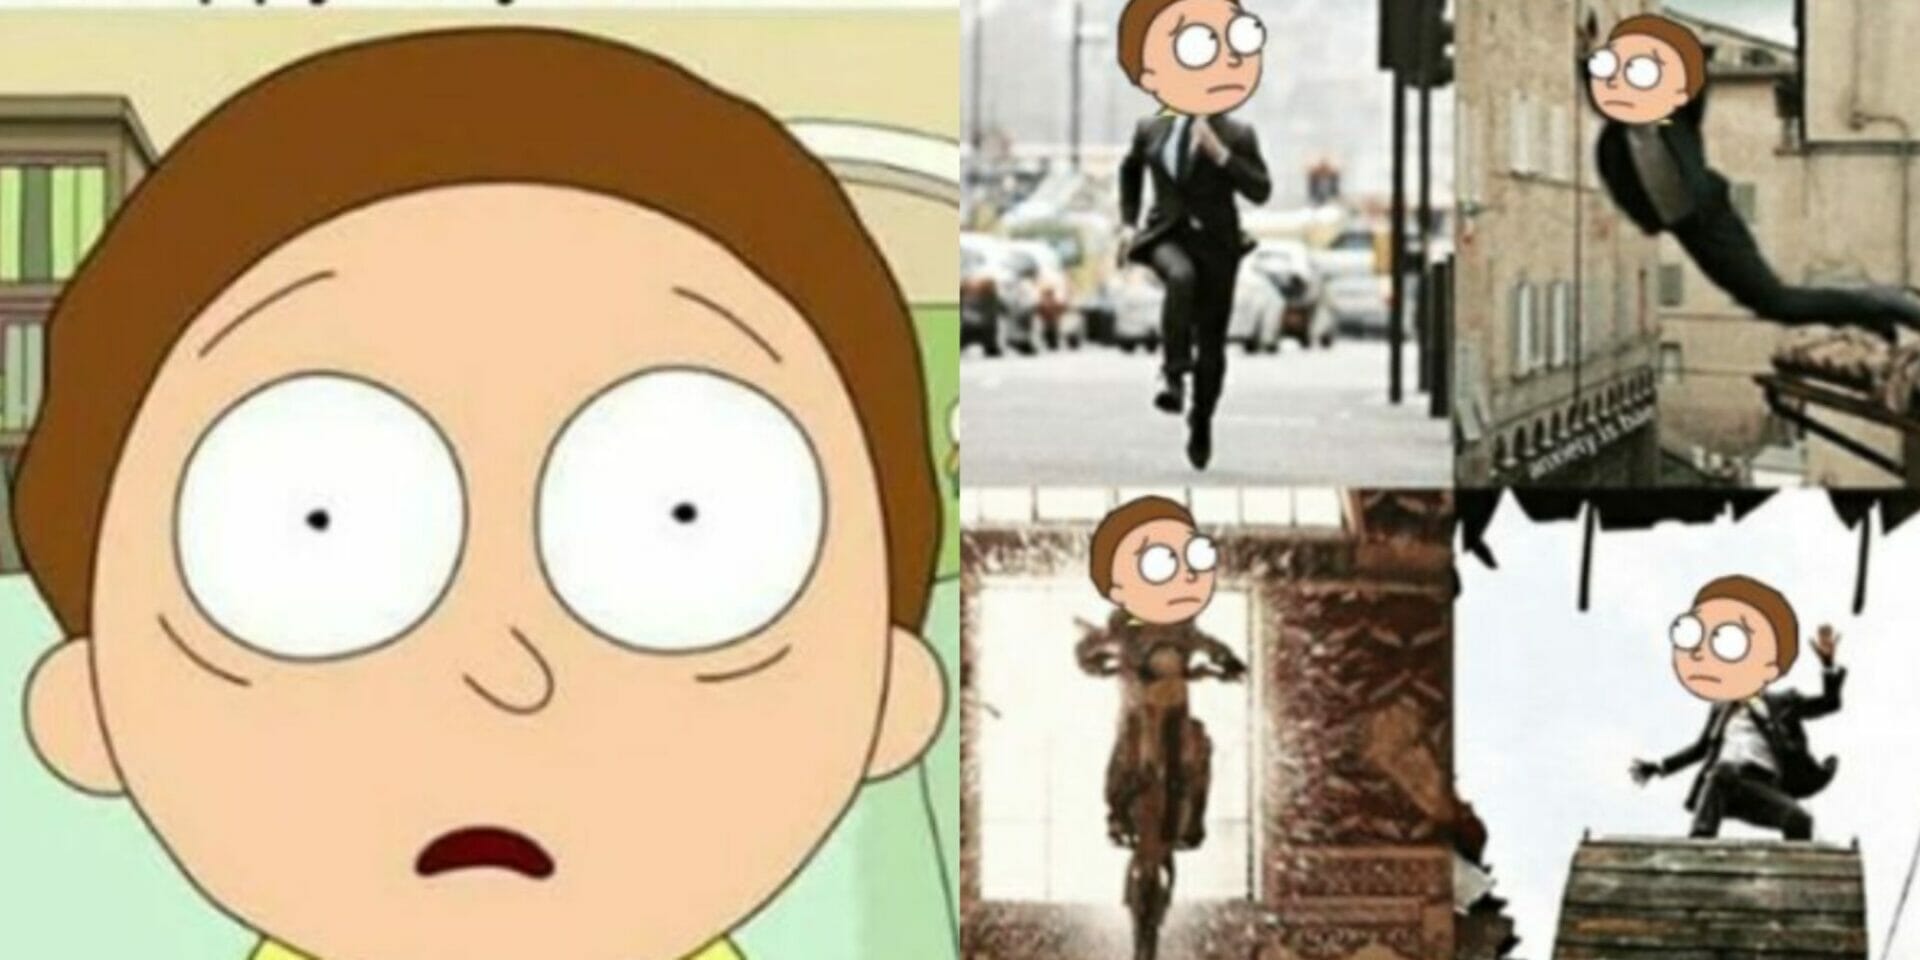 Rick & Morty: 9 Memes That Perfectly Sum Up Morty